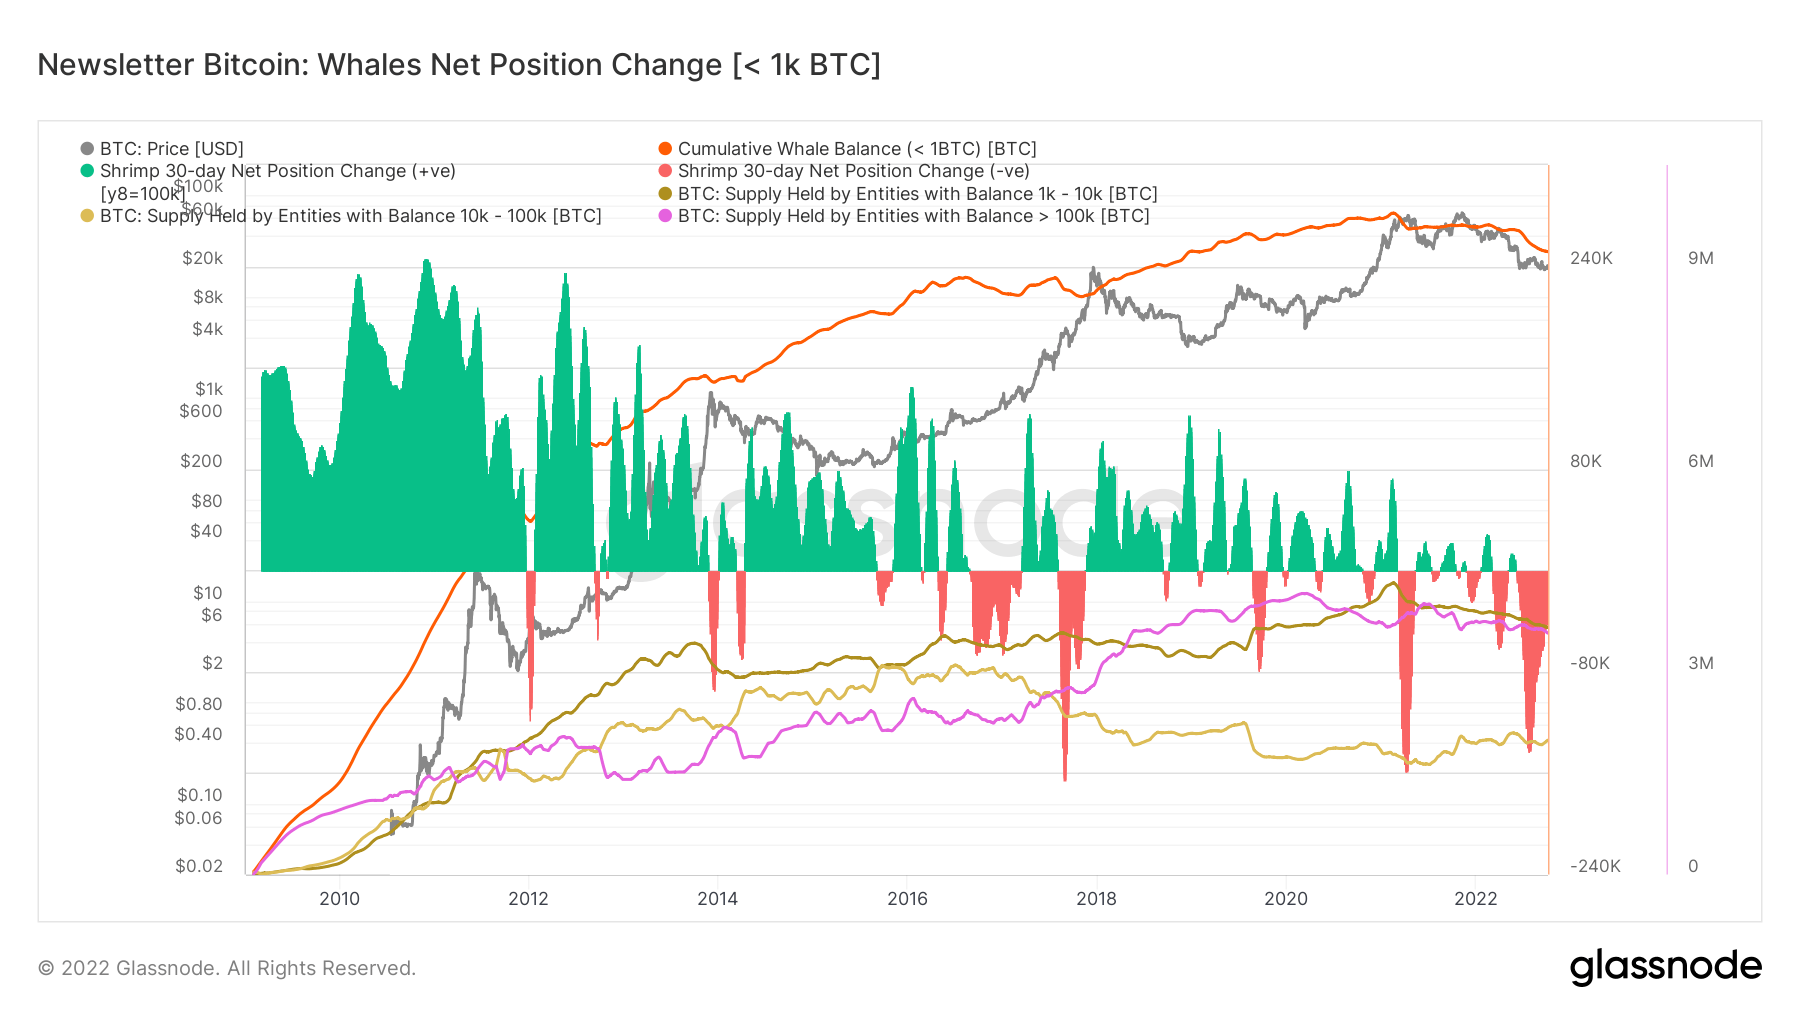 Bitcoin whale net position change